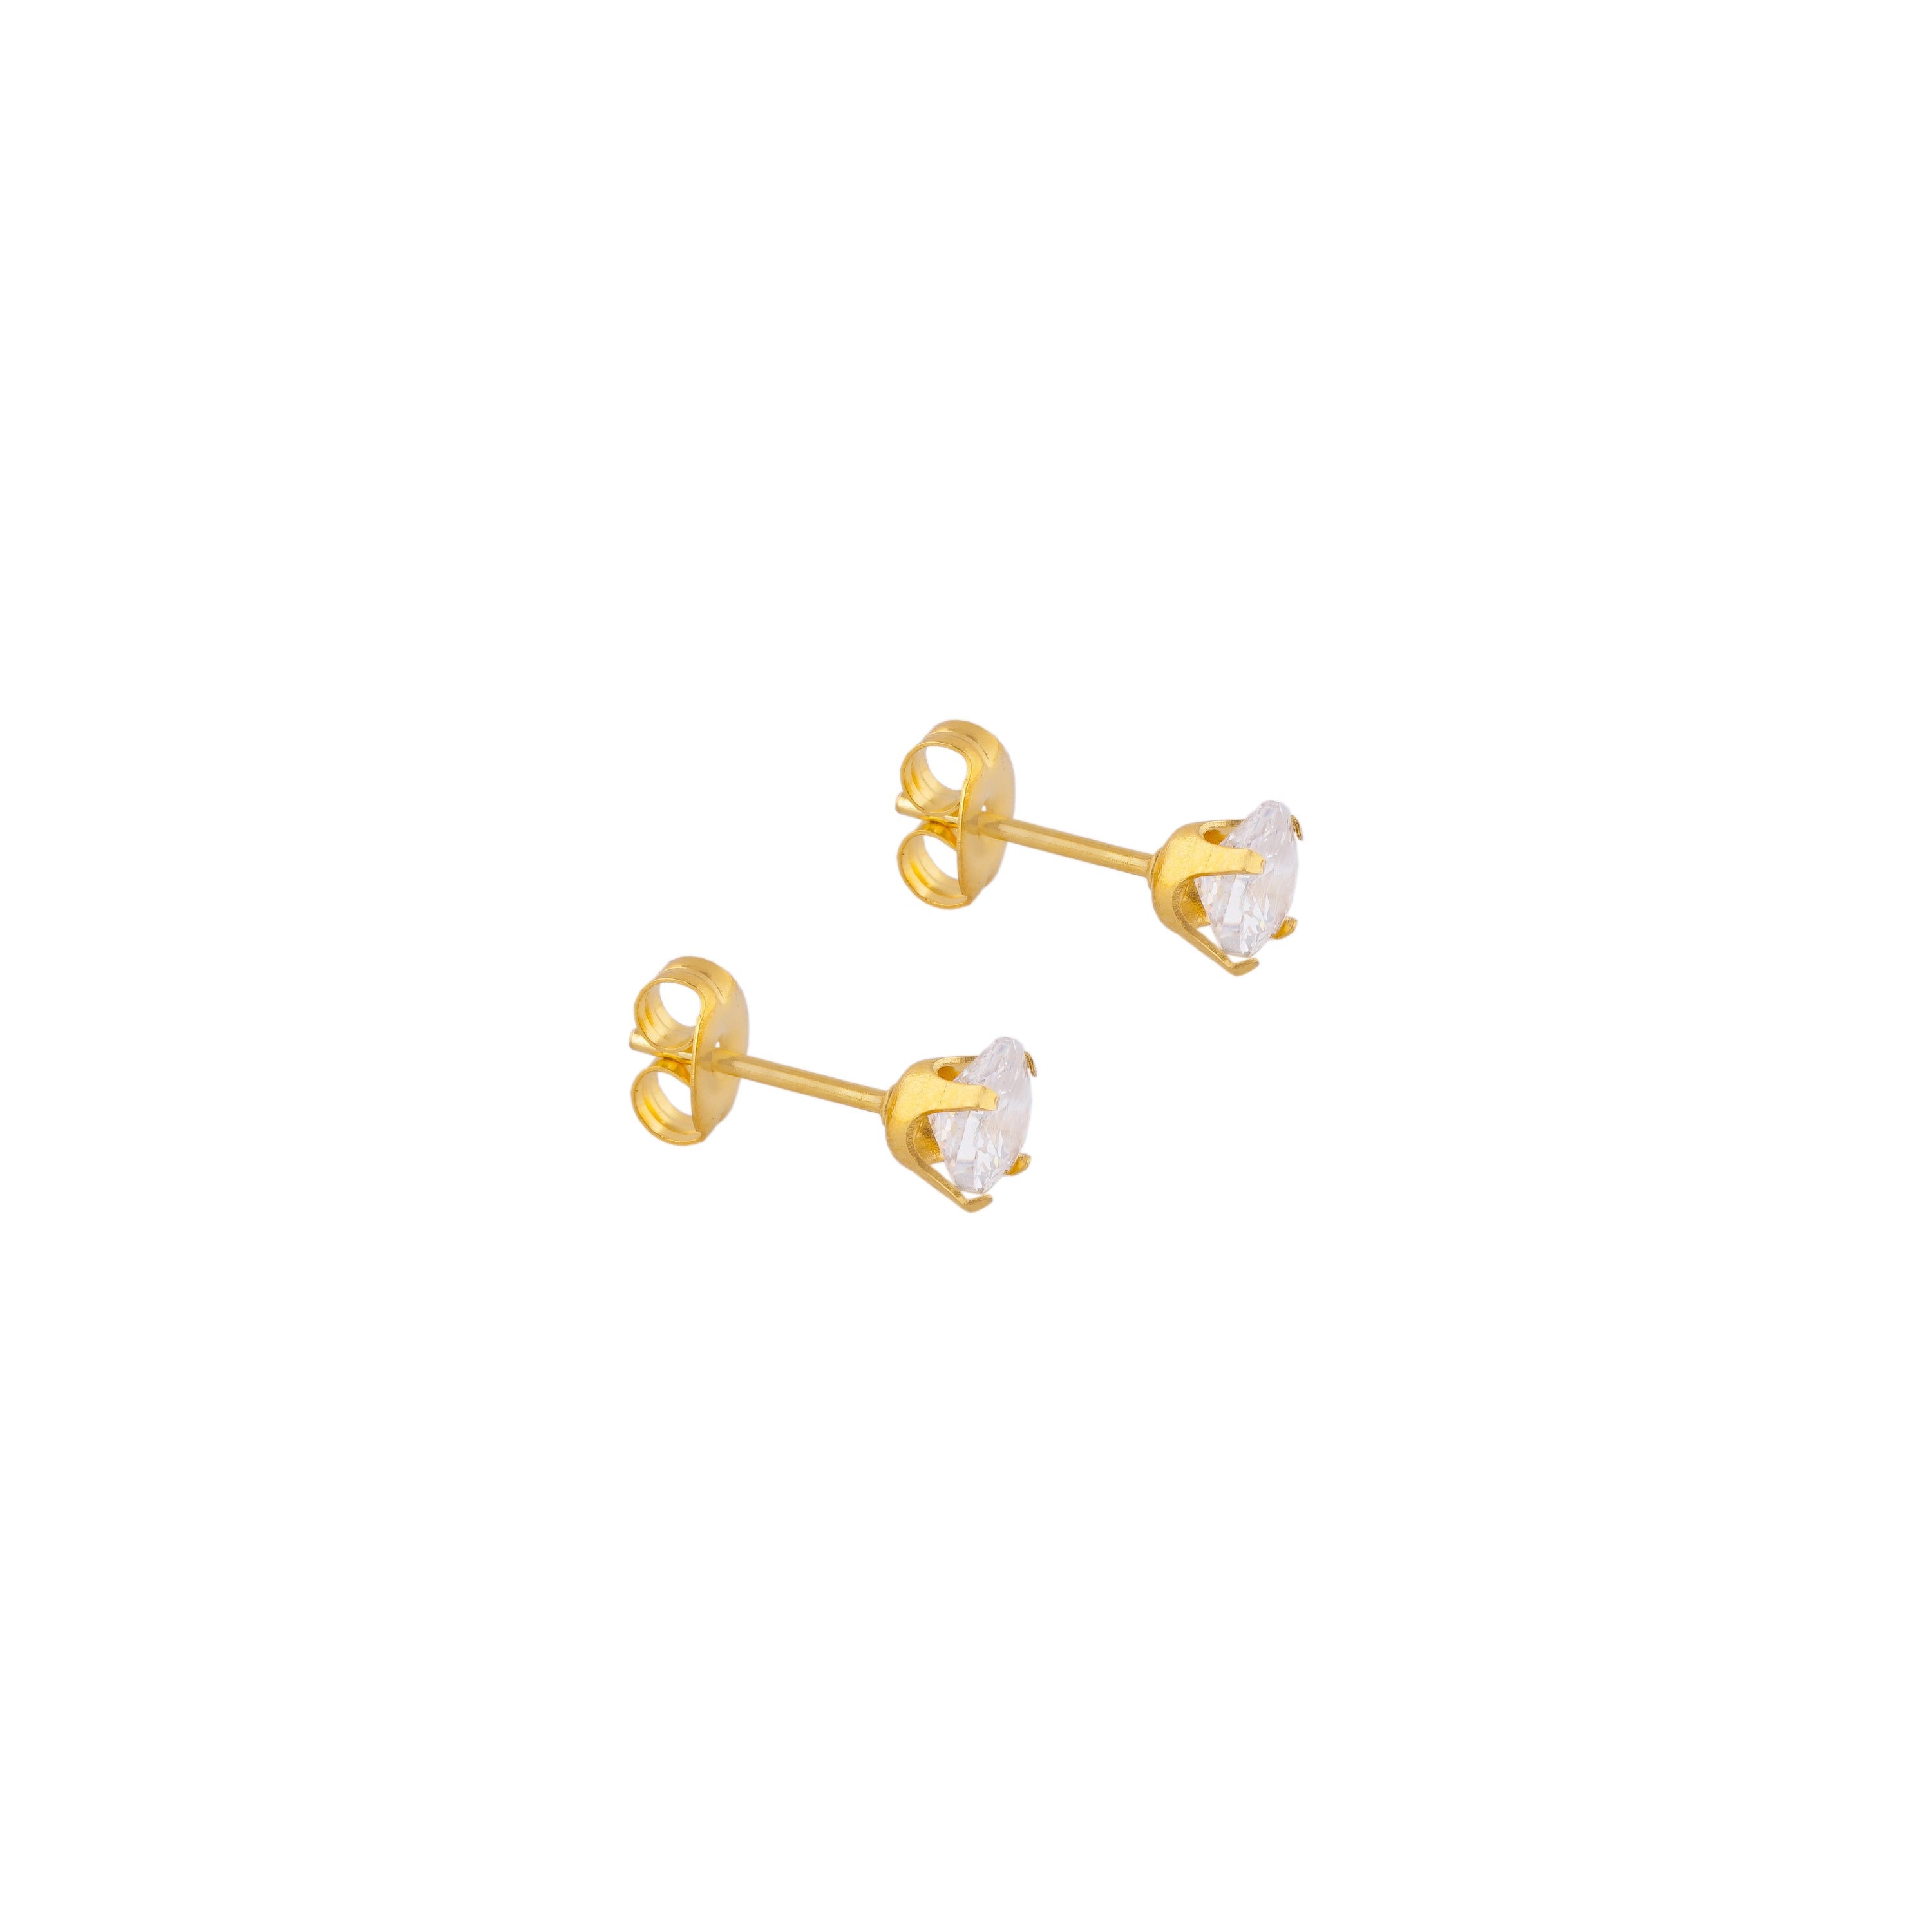 5X5MM Heart Cubic Zirconia 24K Pure Gold Plated Ear Studs | MADE IN USA | Ideal for everyday wear